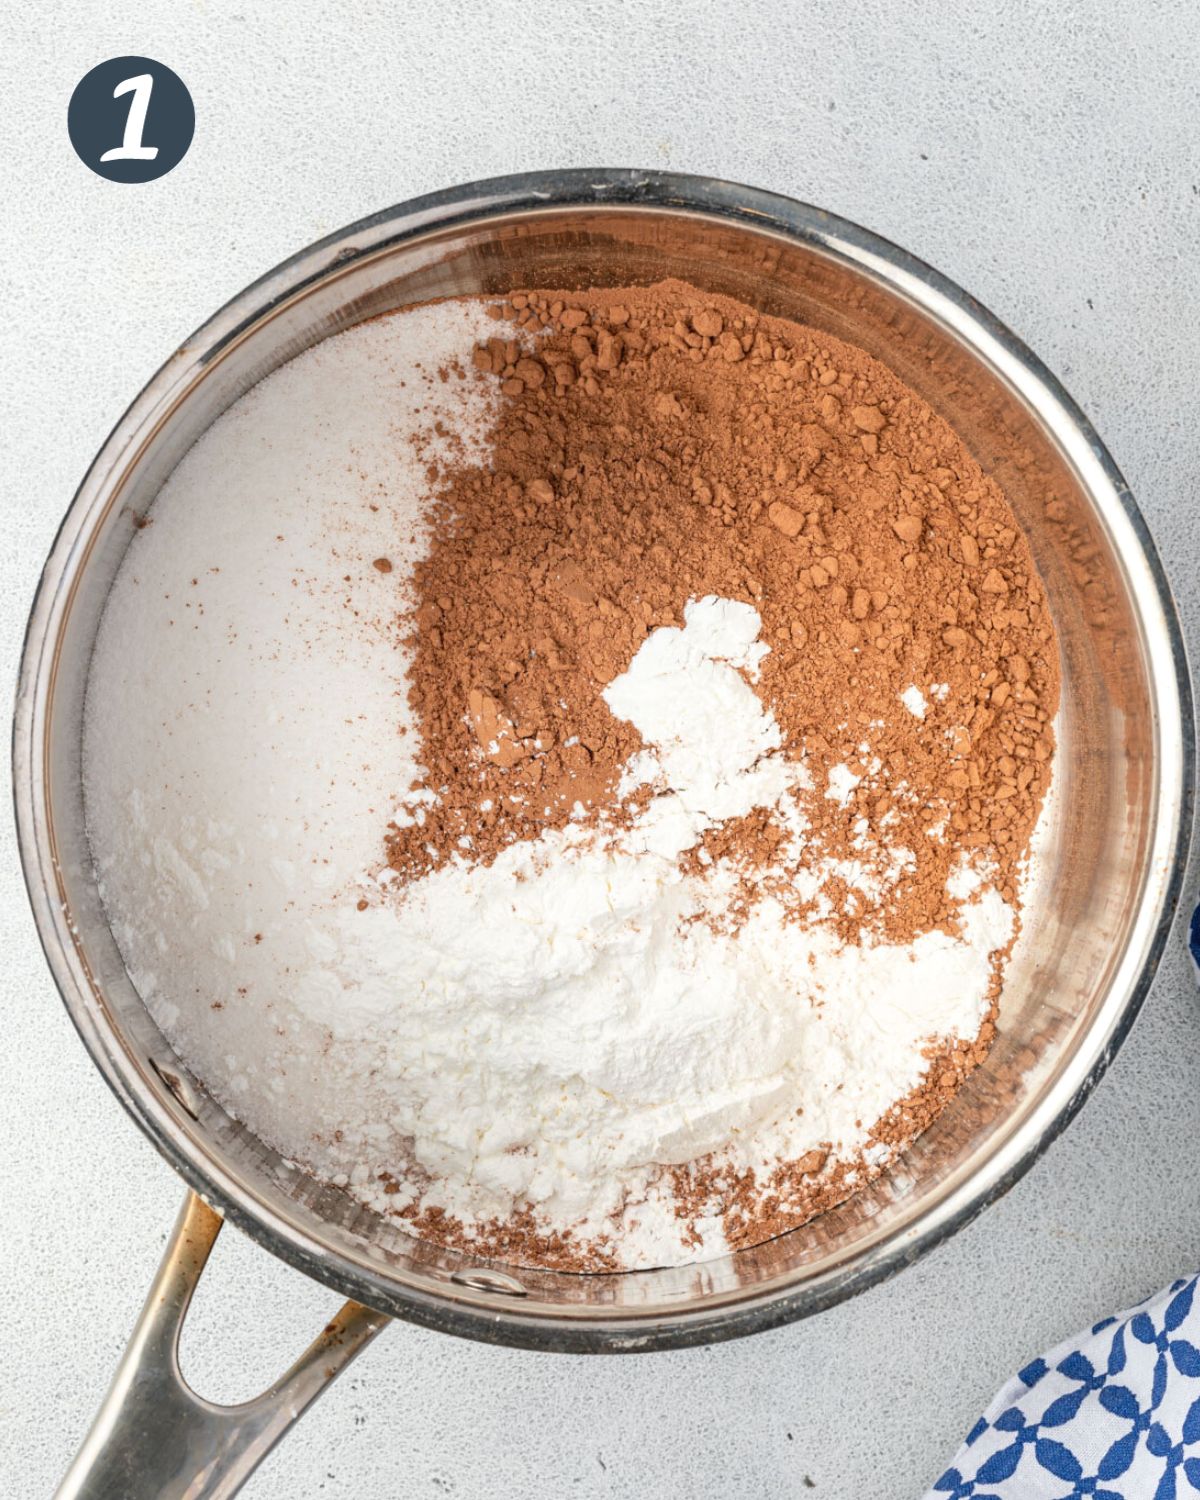 Cocoa powder, sugar, and cornstarch in a stainless steel pan.